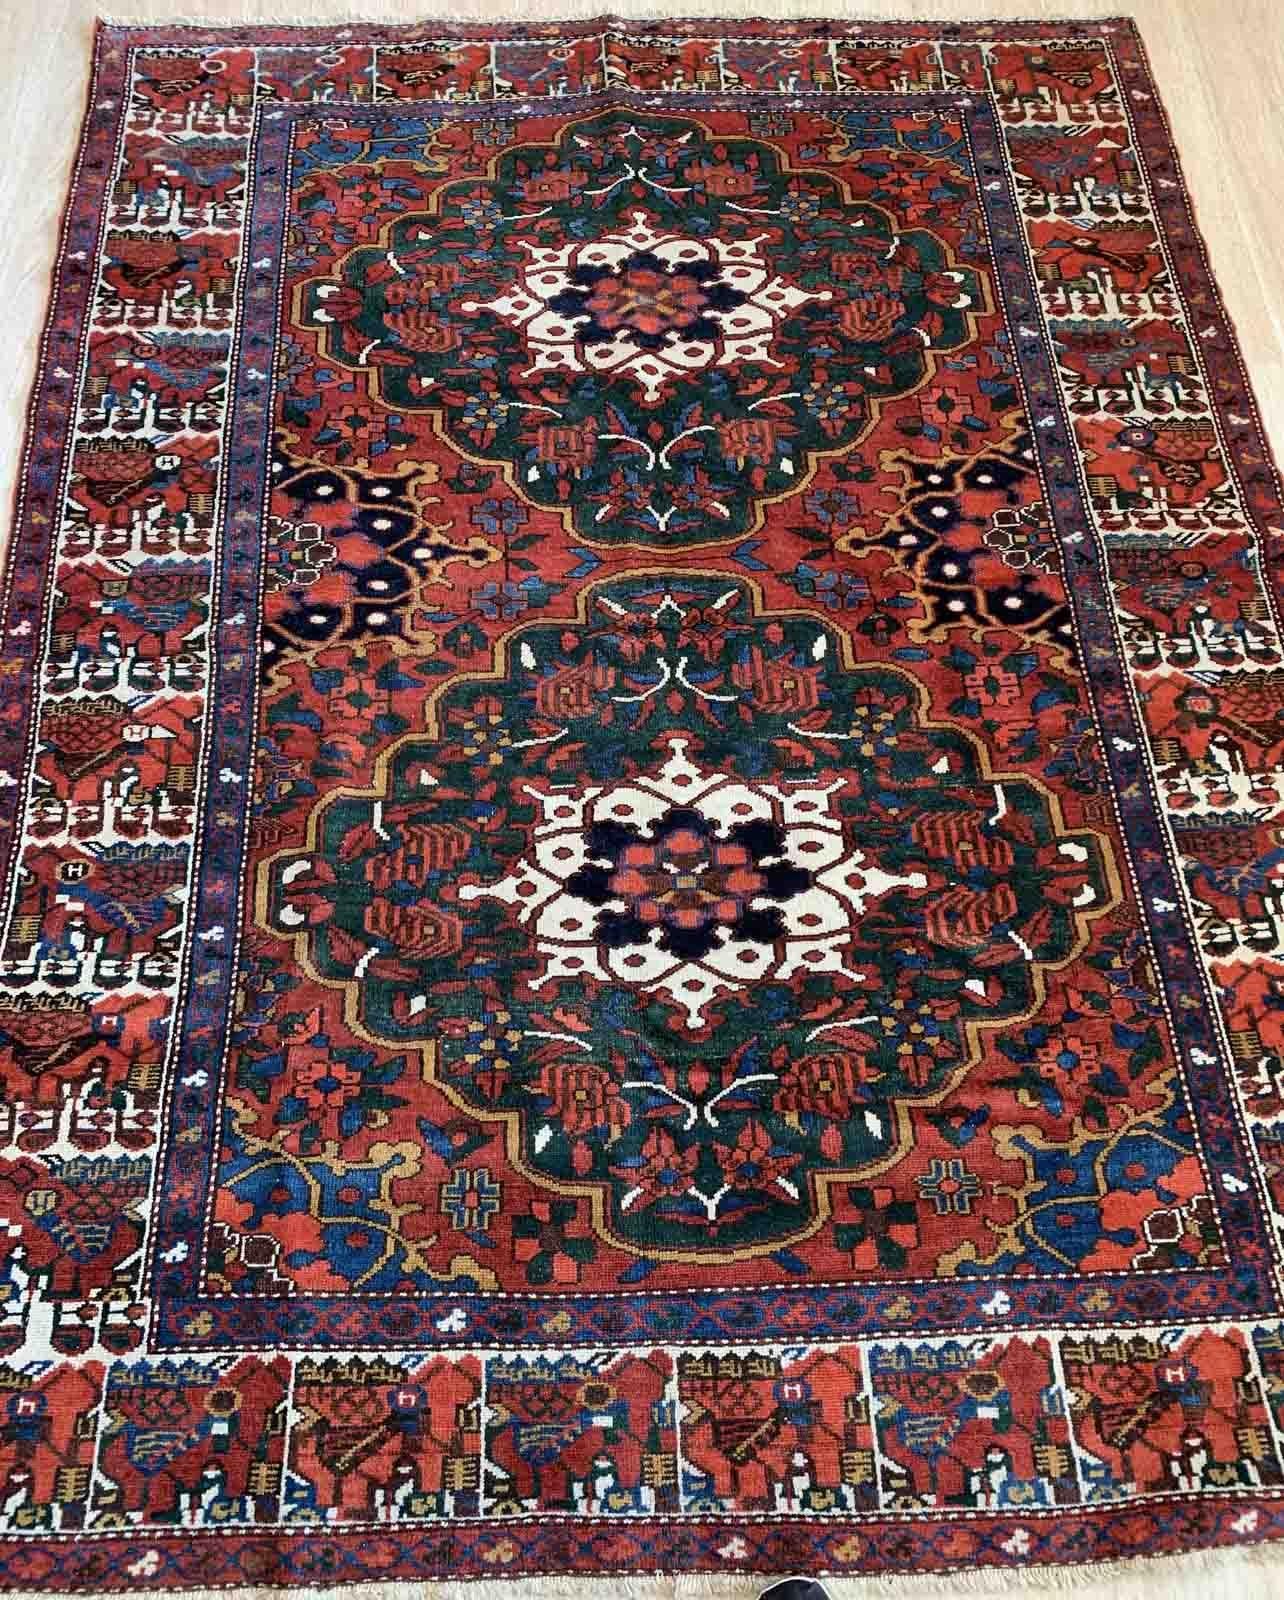 Handmade antique Middle Eastern Bakhtiari rug in original good condition. The rug is from the beginning of 20th century.

-condition: original good,

-circa: 1920s,

-size: 5' x 7.2' (152cm x 219cm)
?
-material: wool

-country of origin: